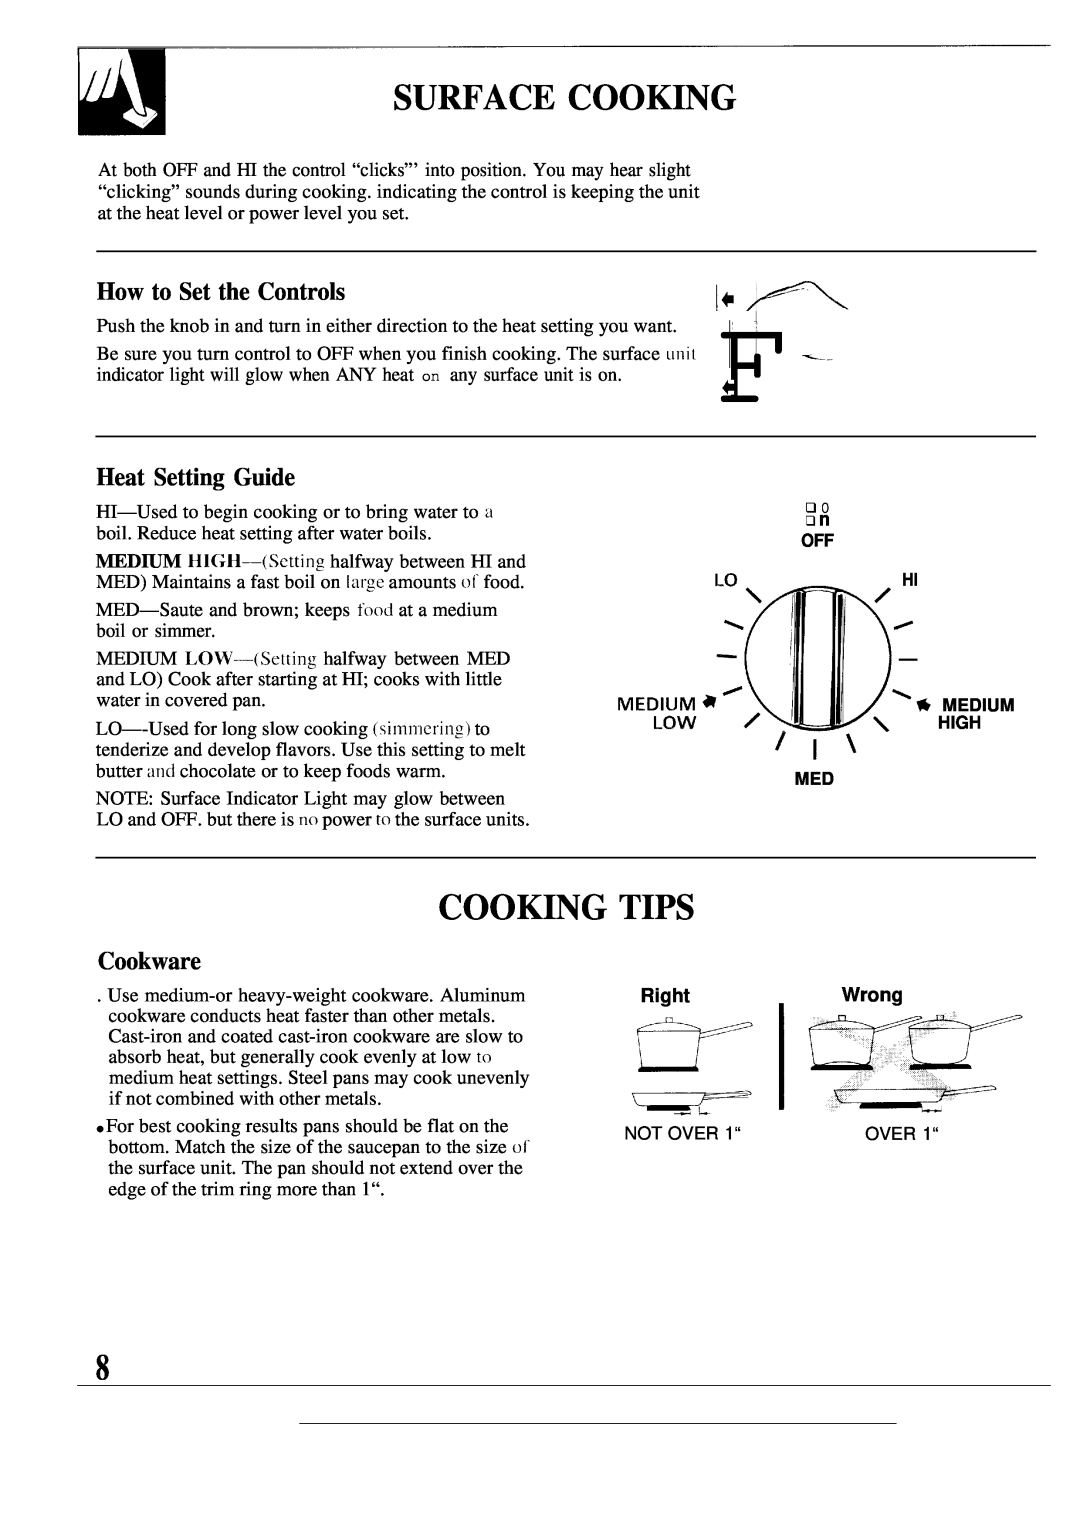 GE JBP26WR Surface Cooking, Cooking Tips, How to Set the Controls, Heat Setting Guide, Cookware, F+‘, I* a, RightWrong 